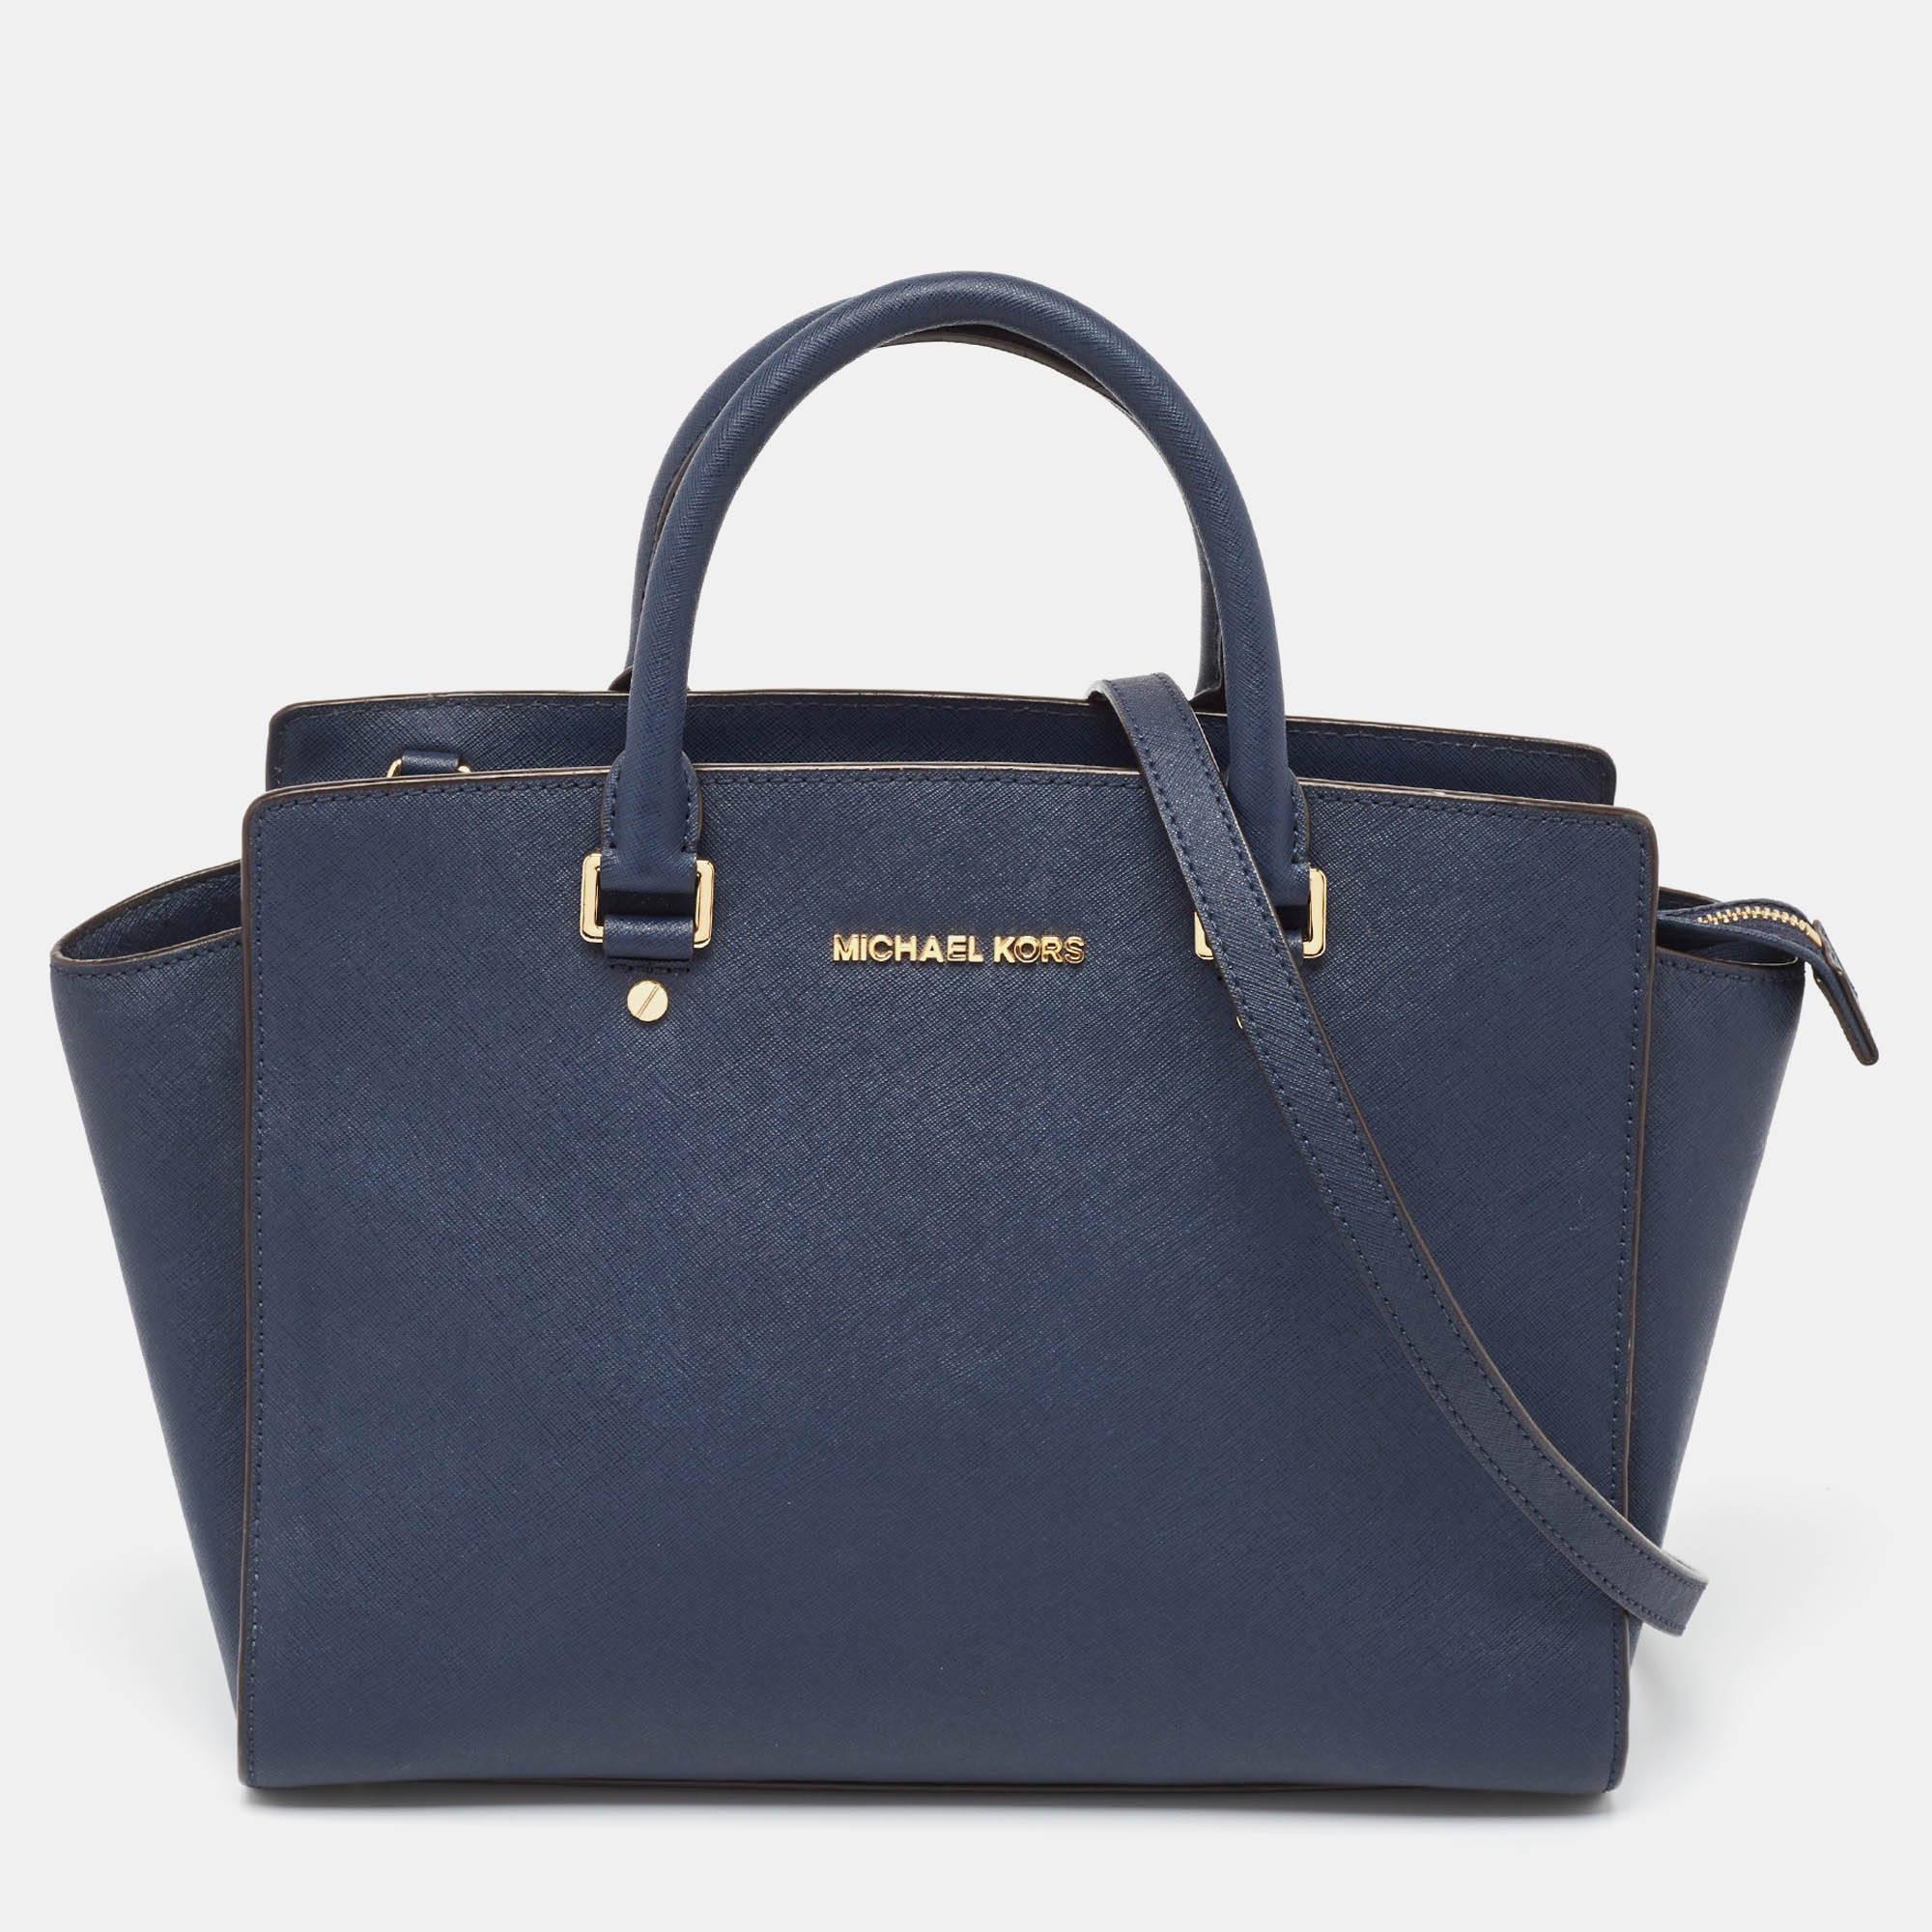 This alluring tote bag for women has been designed to assist you on any day. Convenient to carry and fashionably designed the tote is cut with skill and sewn into a great shape. It is well equipped to be a reliable accessory.